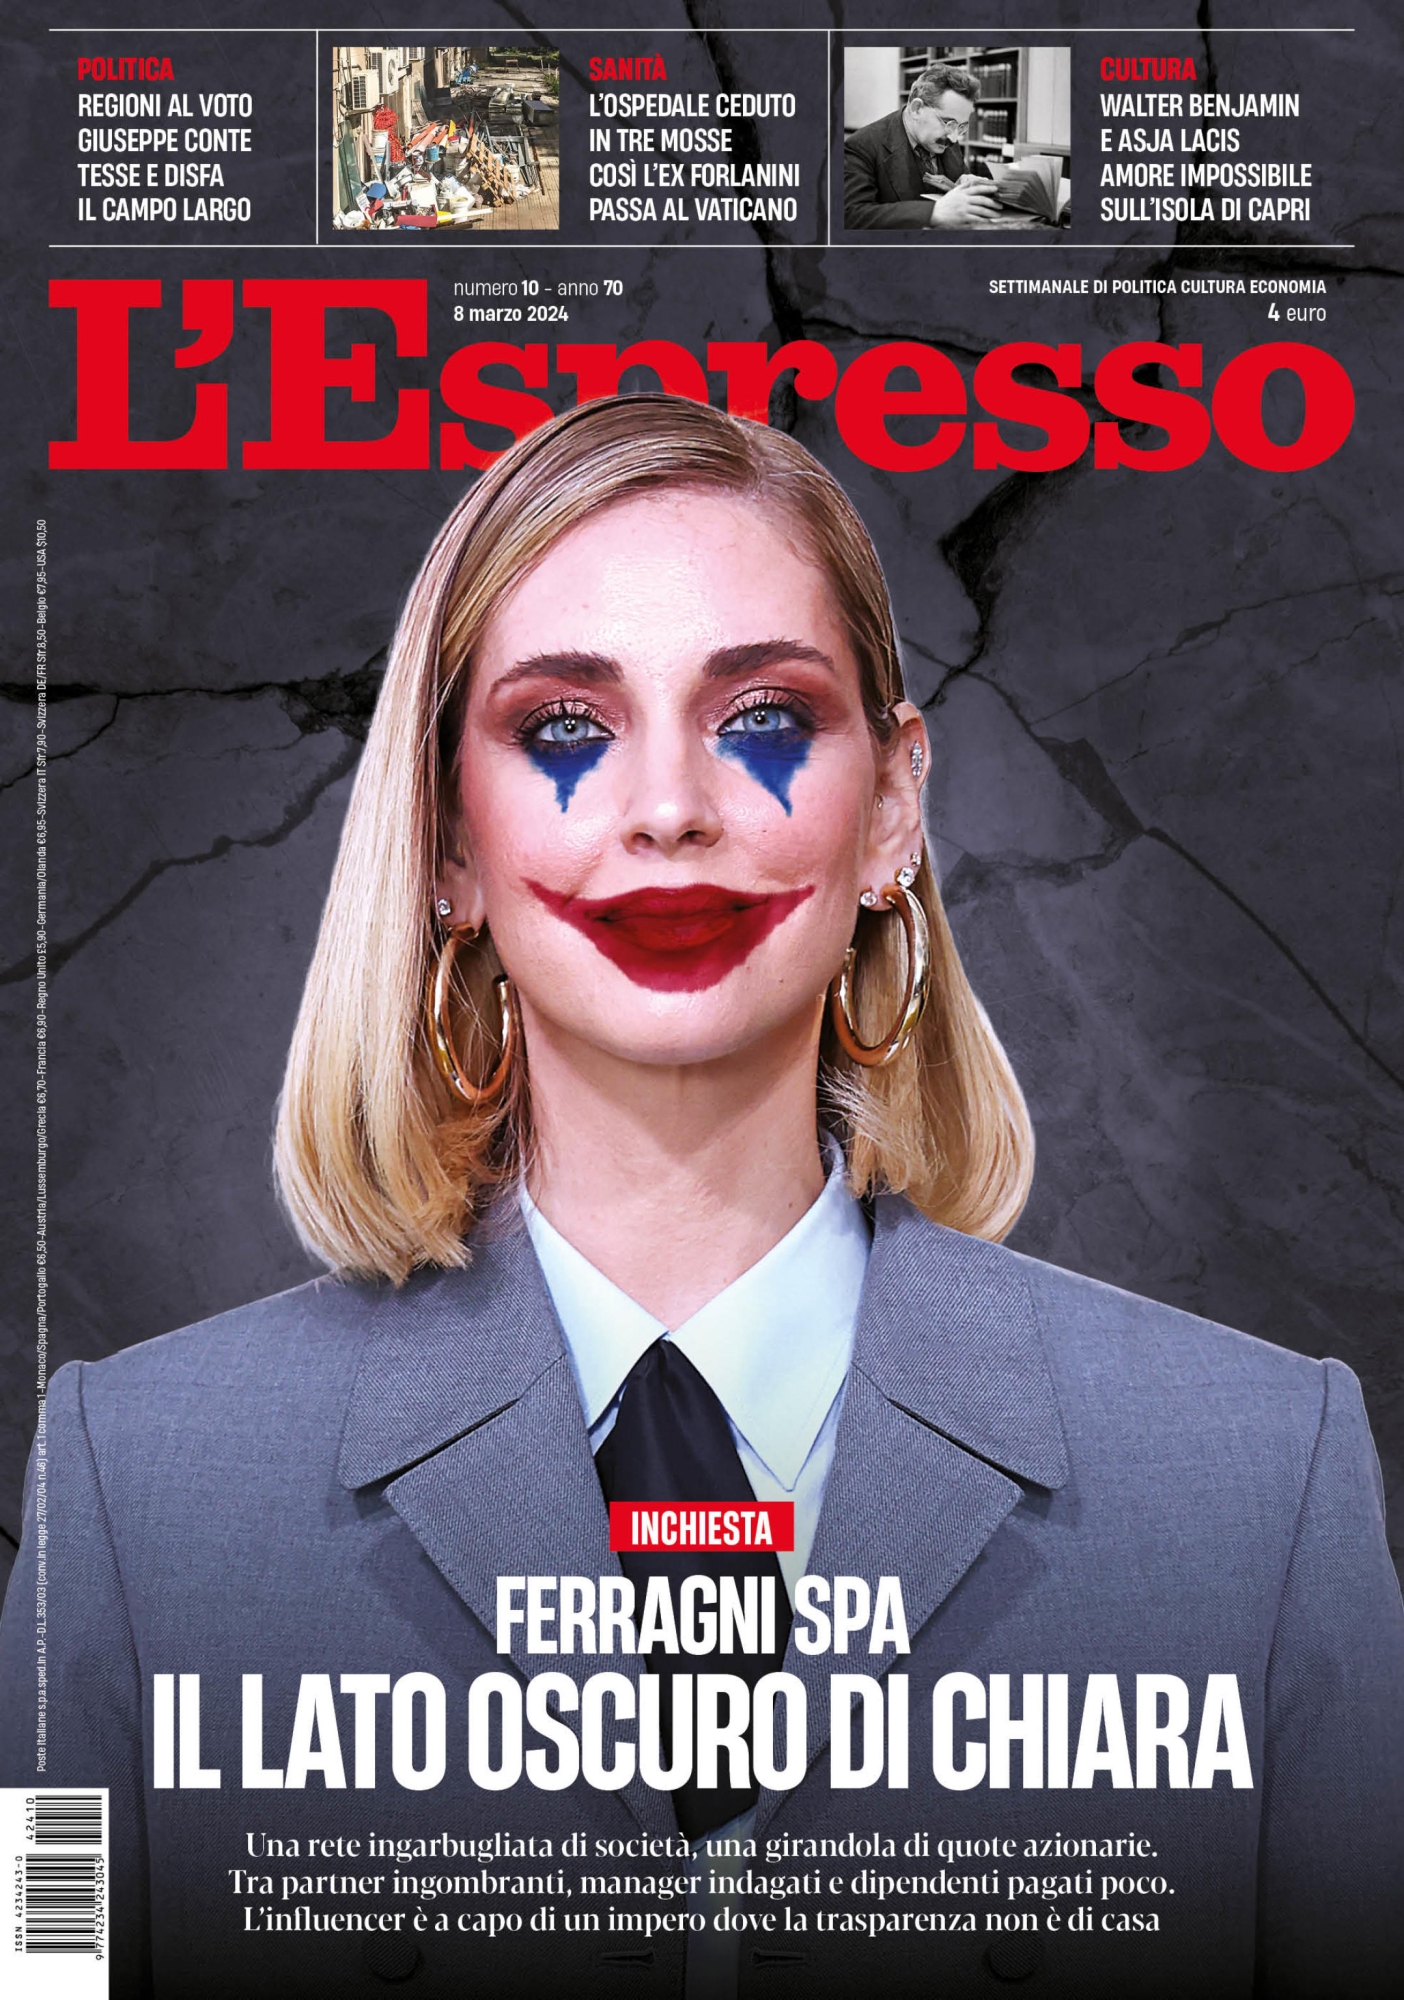 La copertina de L'Espresso in edicola da domani 8 marzo. ANSA/ UFFICIO STAMPA +++ ANSA PROVIDES ACCESS TO THIS HANDOUT PHOTO TO BE USED SOLELY TO ILLUSTRATE NEWS REPORTING OR COMMENTARY ON THE FACTS OR EVENTS DEPICTED IN THIS IMAGE; NO ARCHIVING; NO LICENSING +++ NPK +++